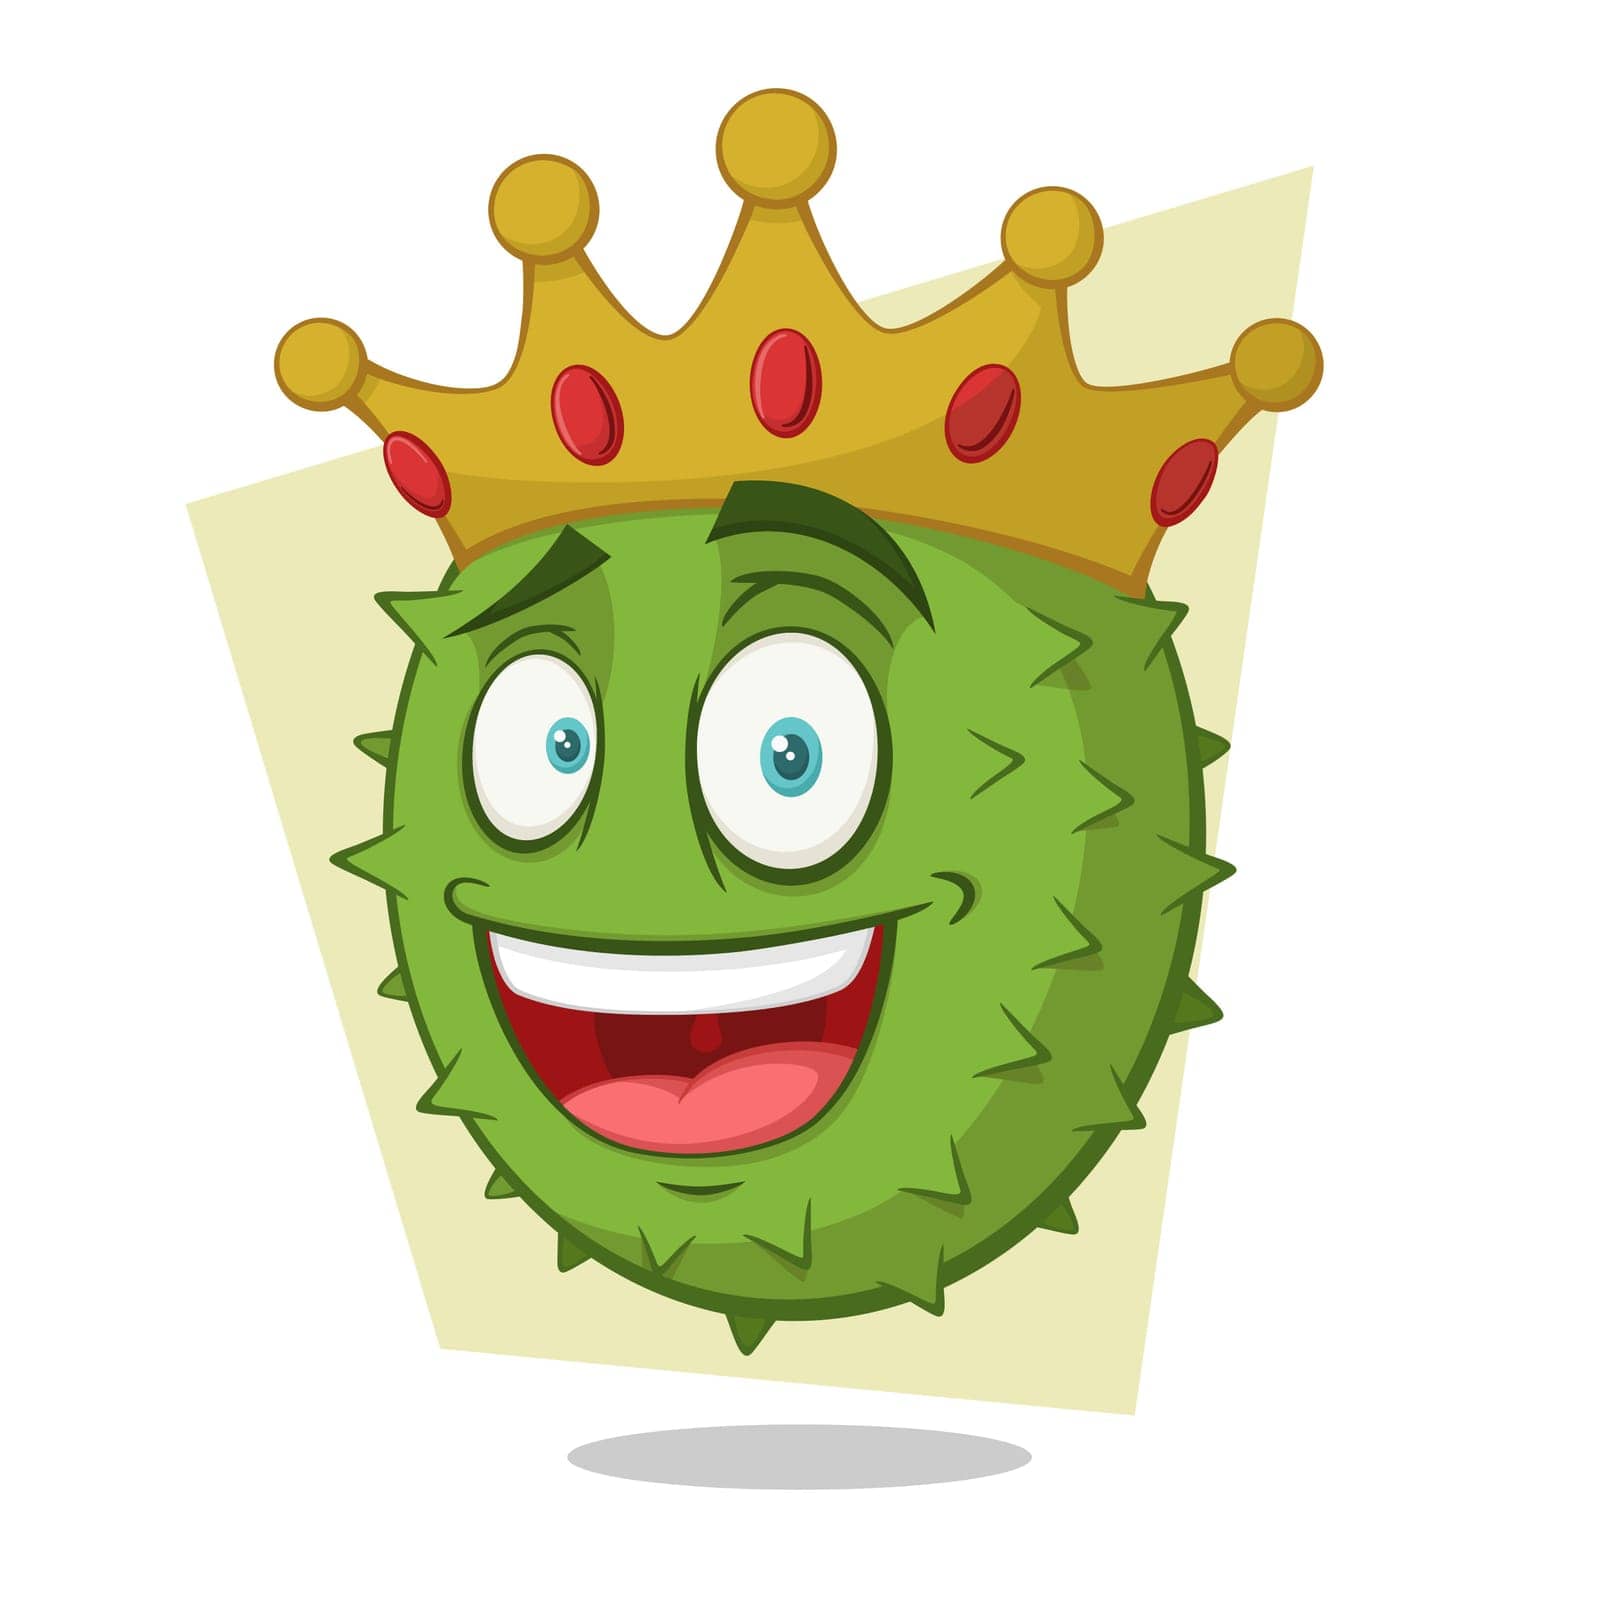 Durian King Cartoon Character With Crown